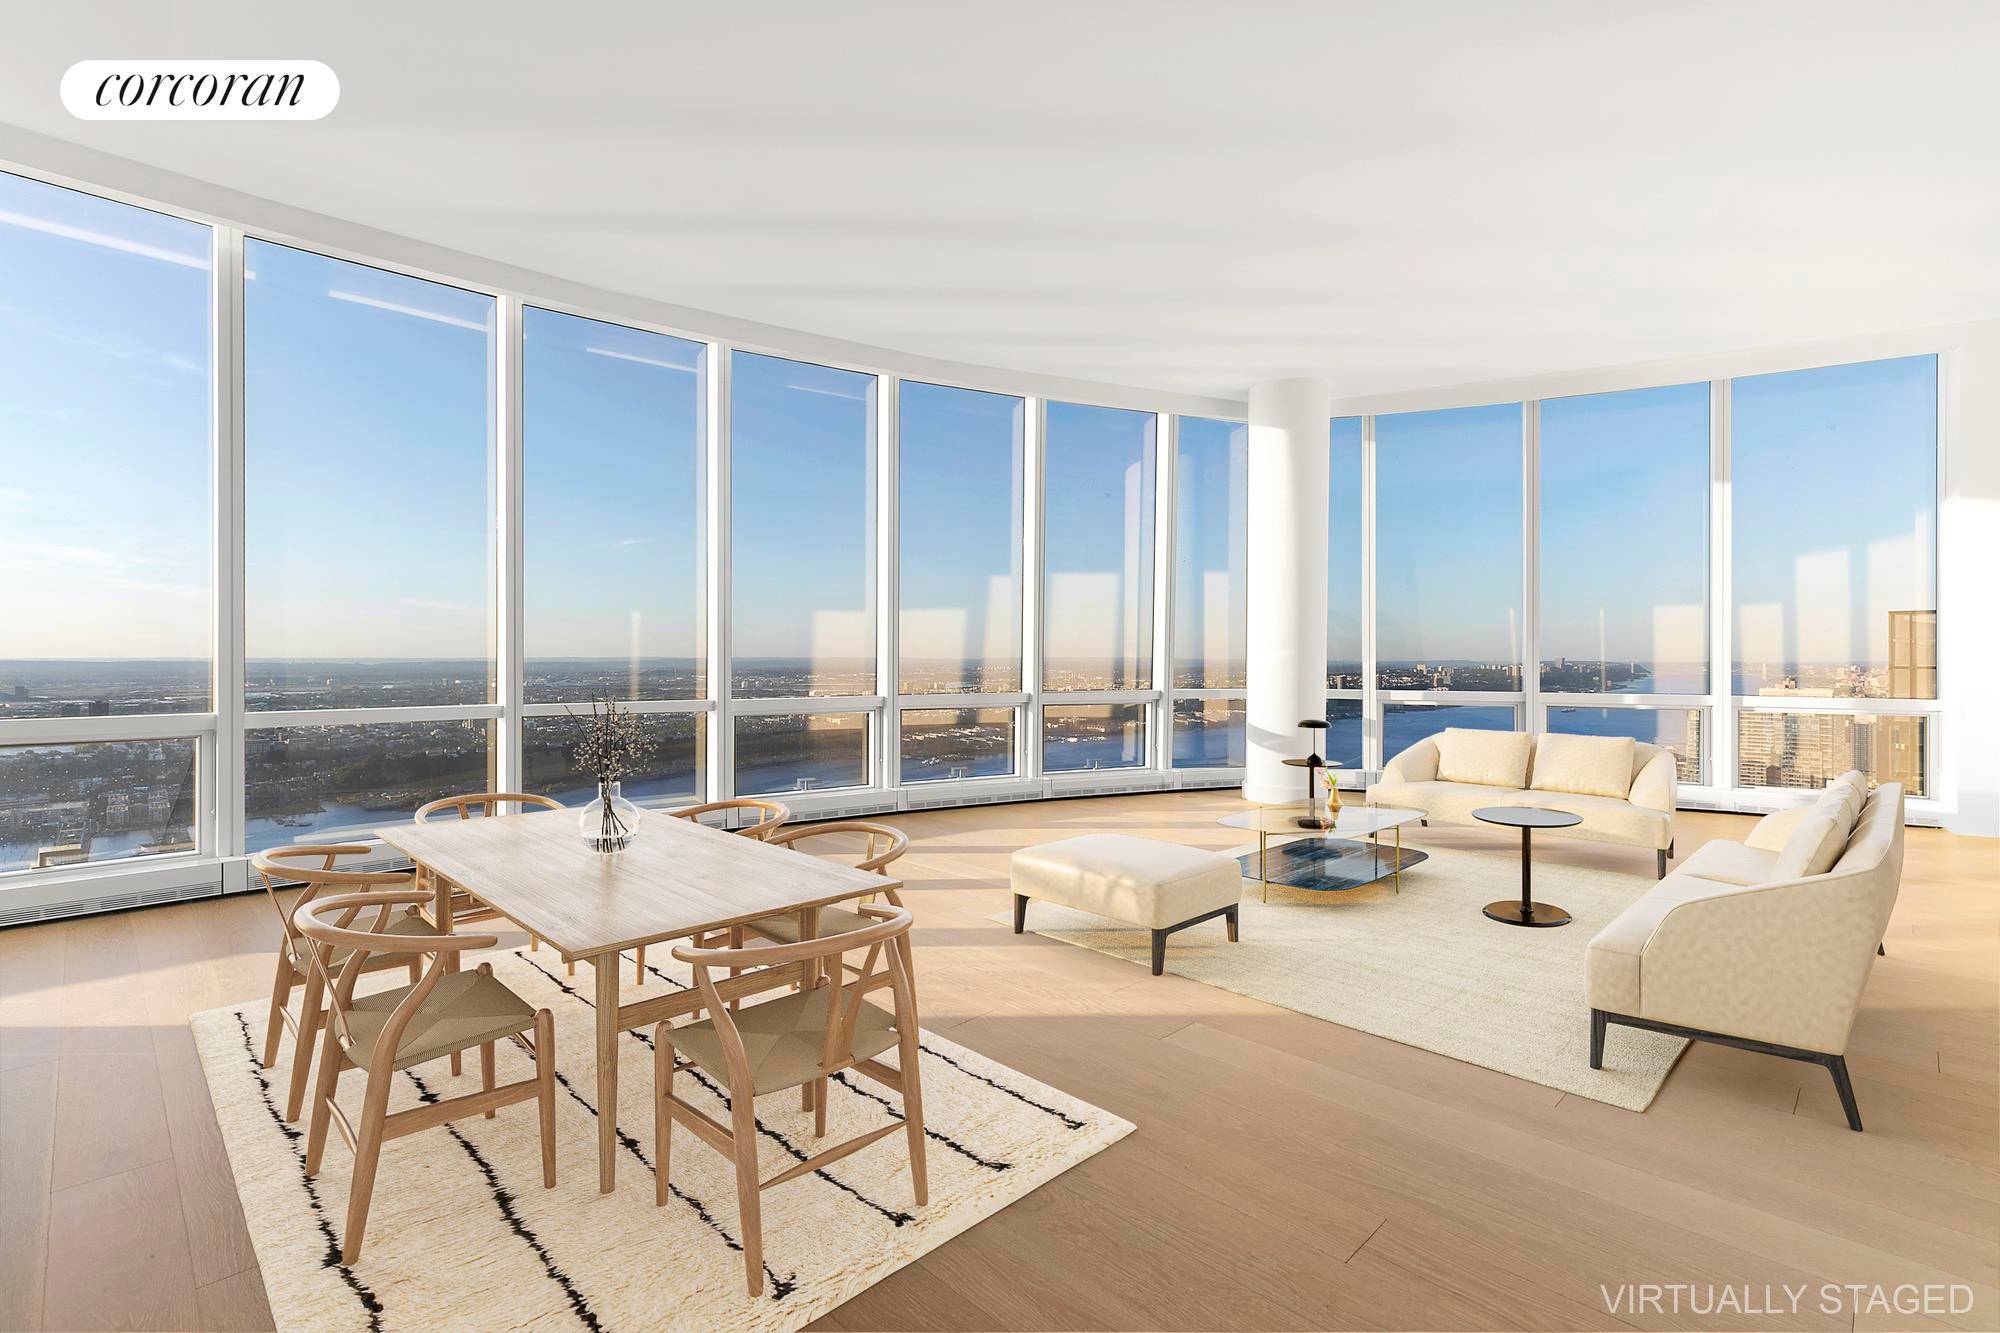 Penthouse 81C features over 2, 600 square feet of living space with almost 11 ft ceiling heights.